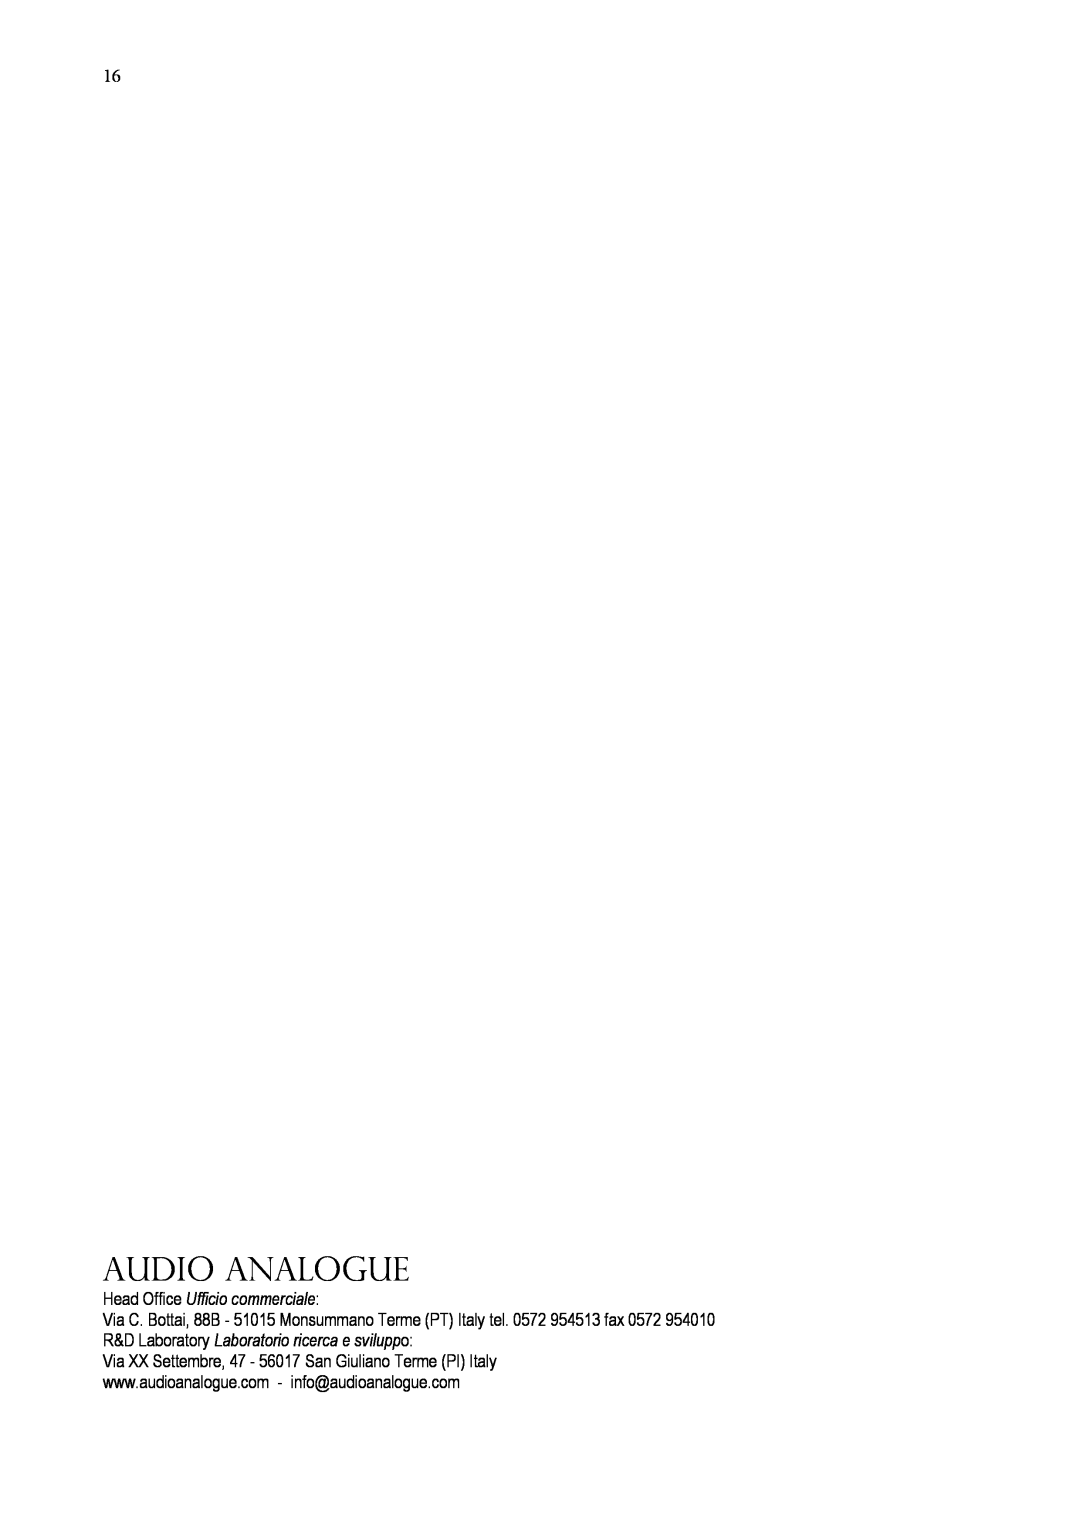 Audio Analogue SRL CDP 2.0 owner manual Audio analogue, Head Office Ufficio commerciale 